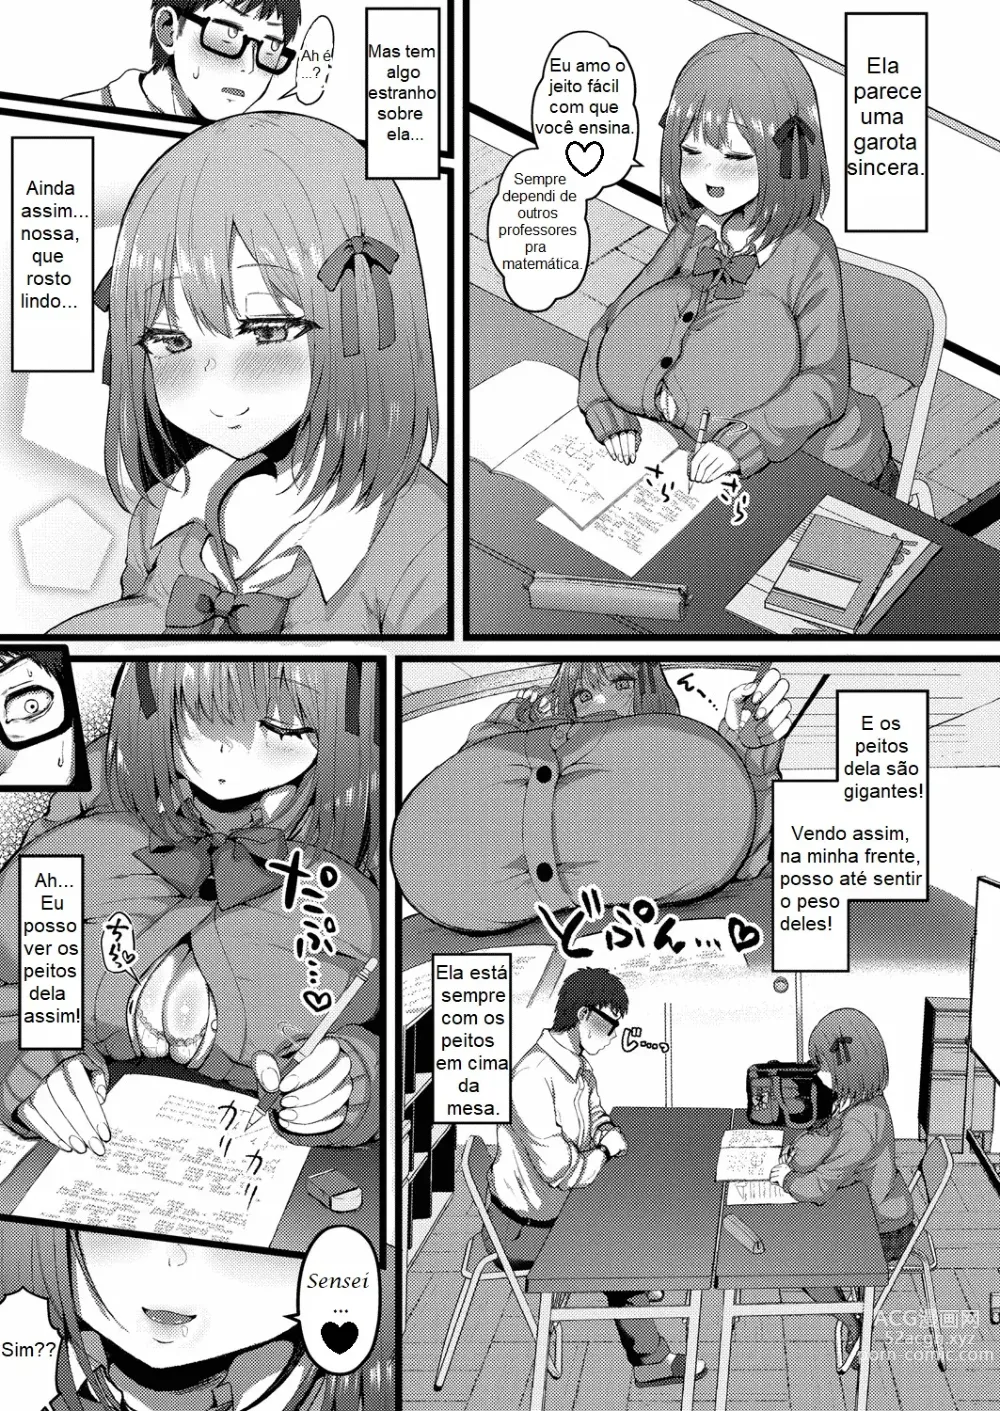 Page 5 of manga I Have A Girlfriend, So I Won't Be Tempted by My Short, M-cup, Sugary Bully Student's Advances.